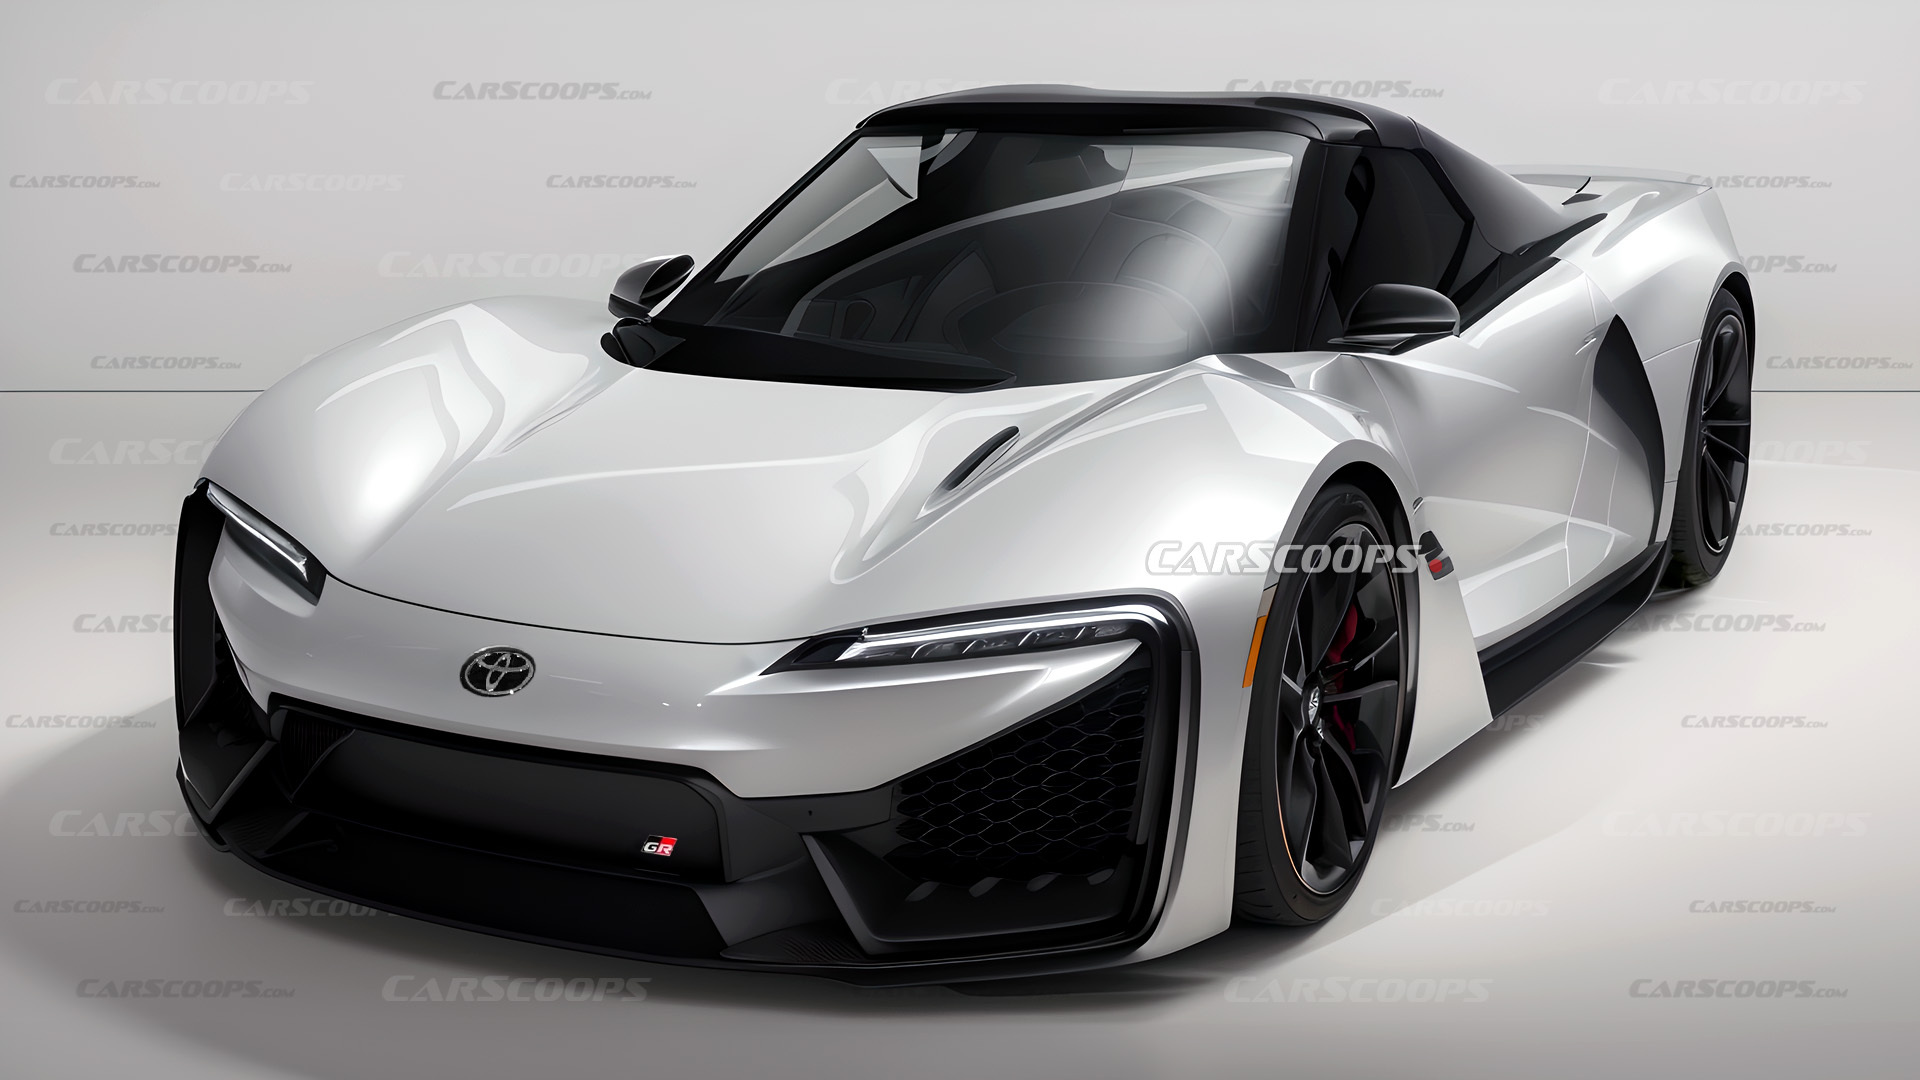 New Toyota MR2 Rumored With GR Corolla Turbo Engine, But Will We